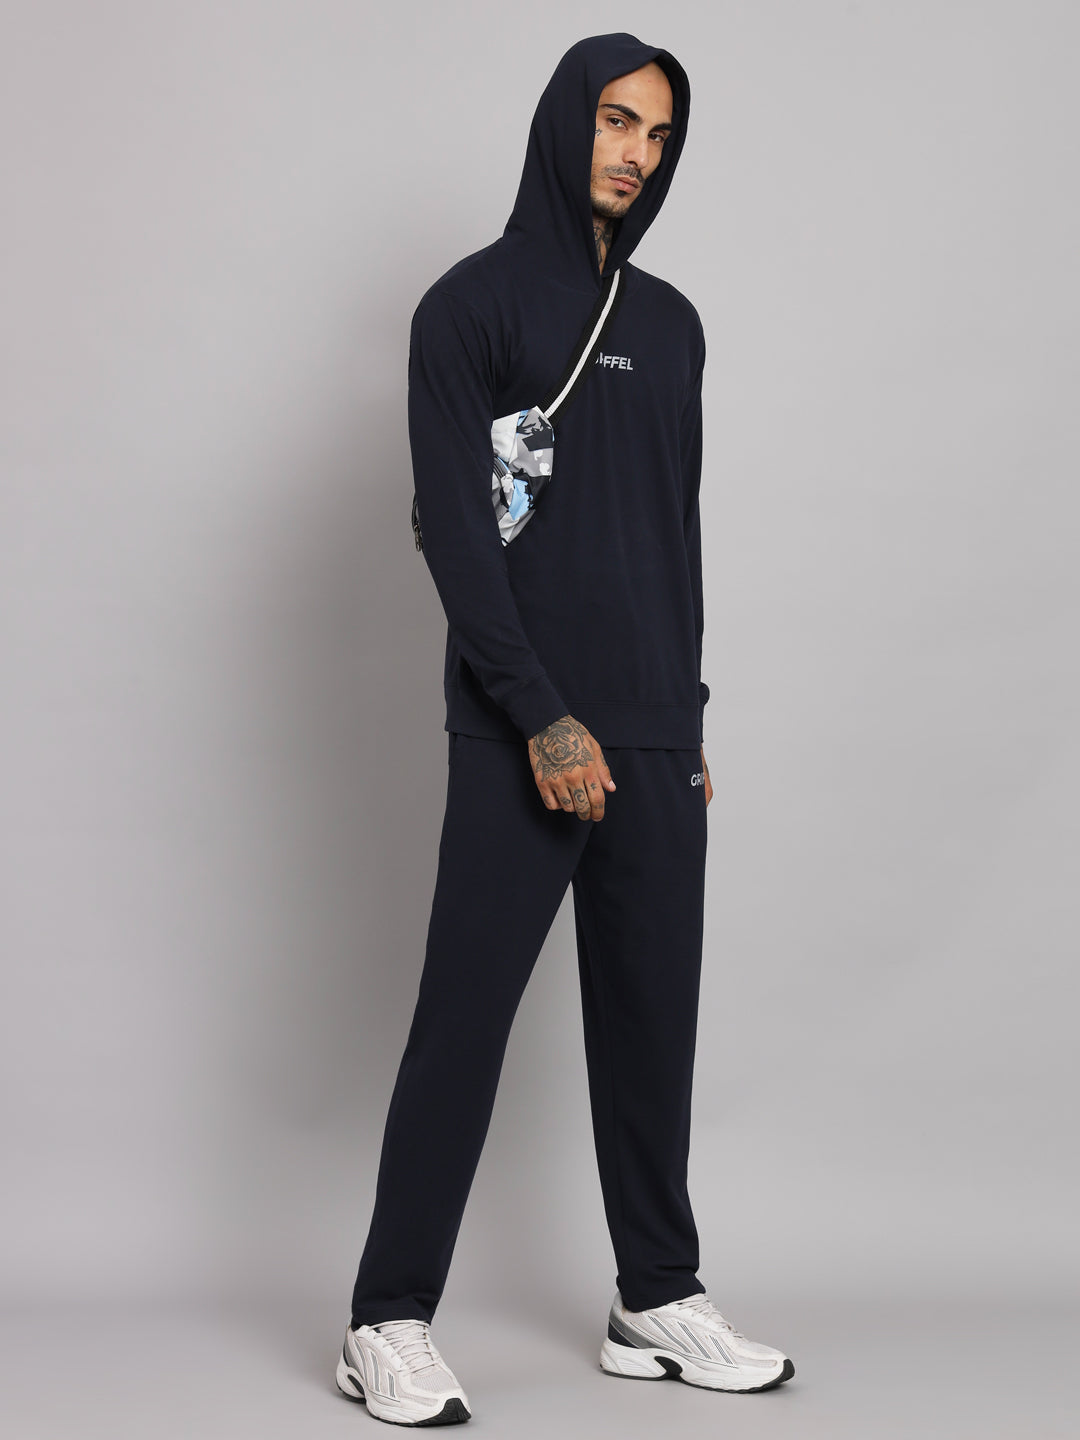 Griffel Men's Pre Winter Front Logo Solid Cotton Basic Hoodie and Joggers Full set Navy Tracksuit - griffel